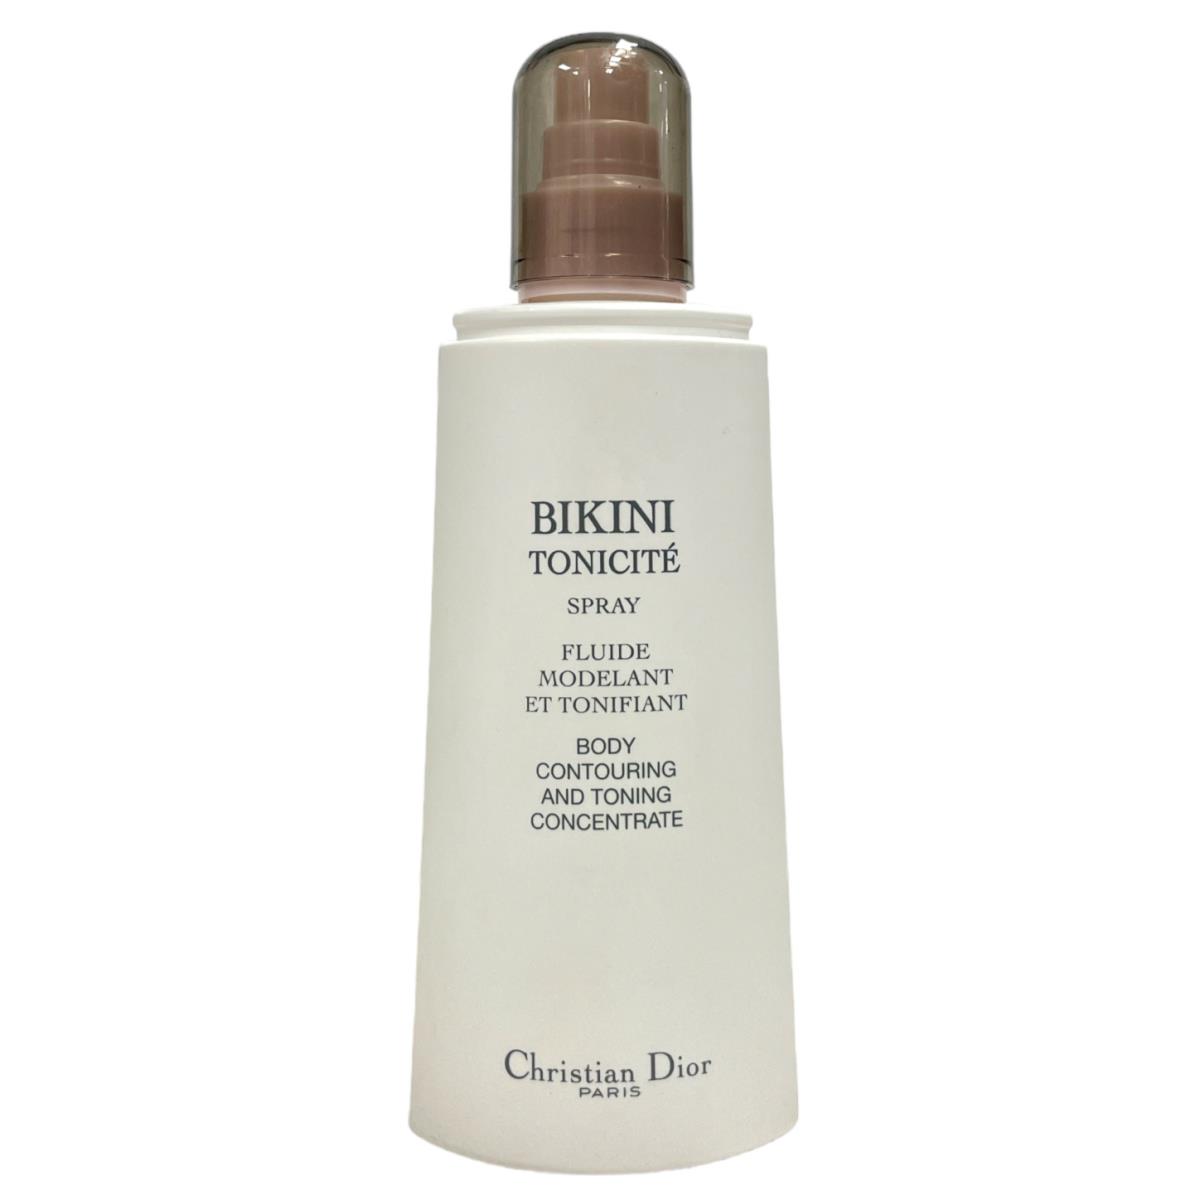 Dior Bikini Tonicite Body Contouring and Toning Concentrate Spray 200mL